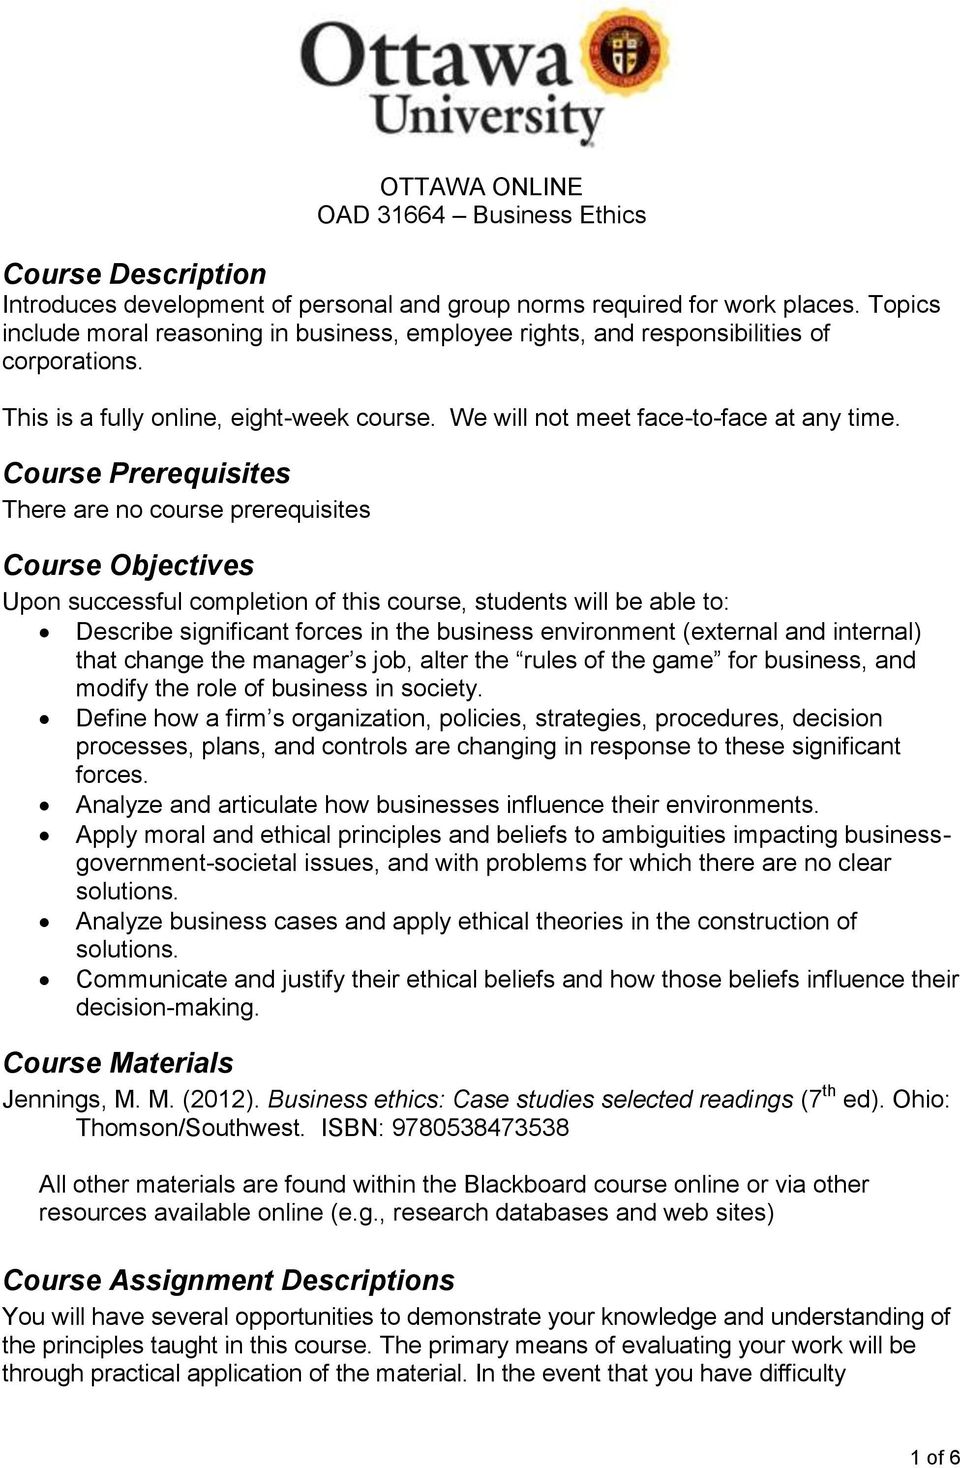 Course Prerequisites There are no course prerequisites Course Objectives Upon successful completion of this course, students will be able to: Describe significant forces in the business environment